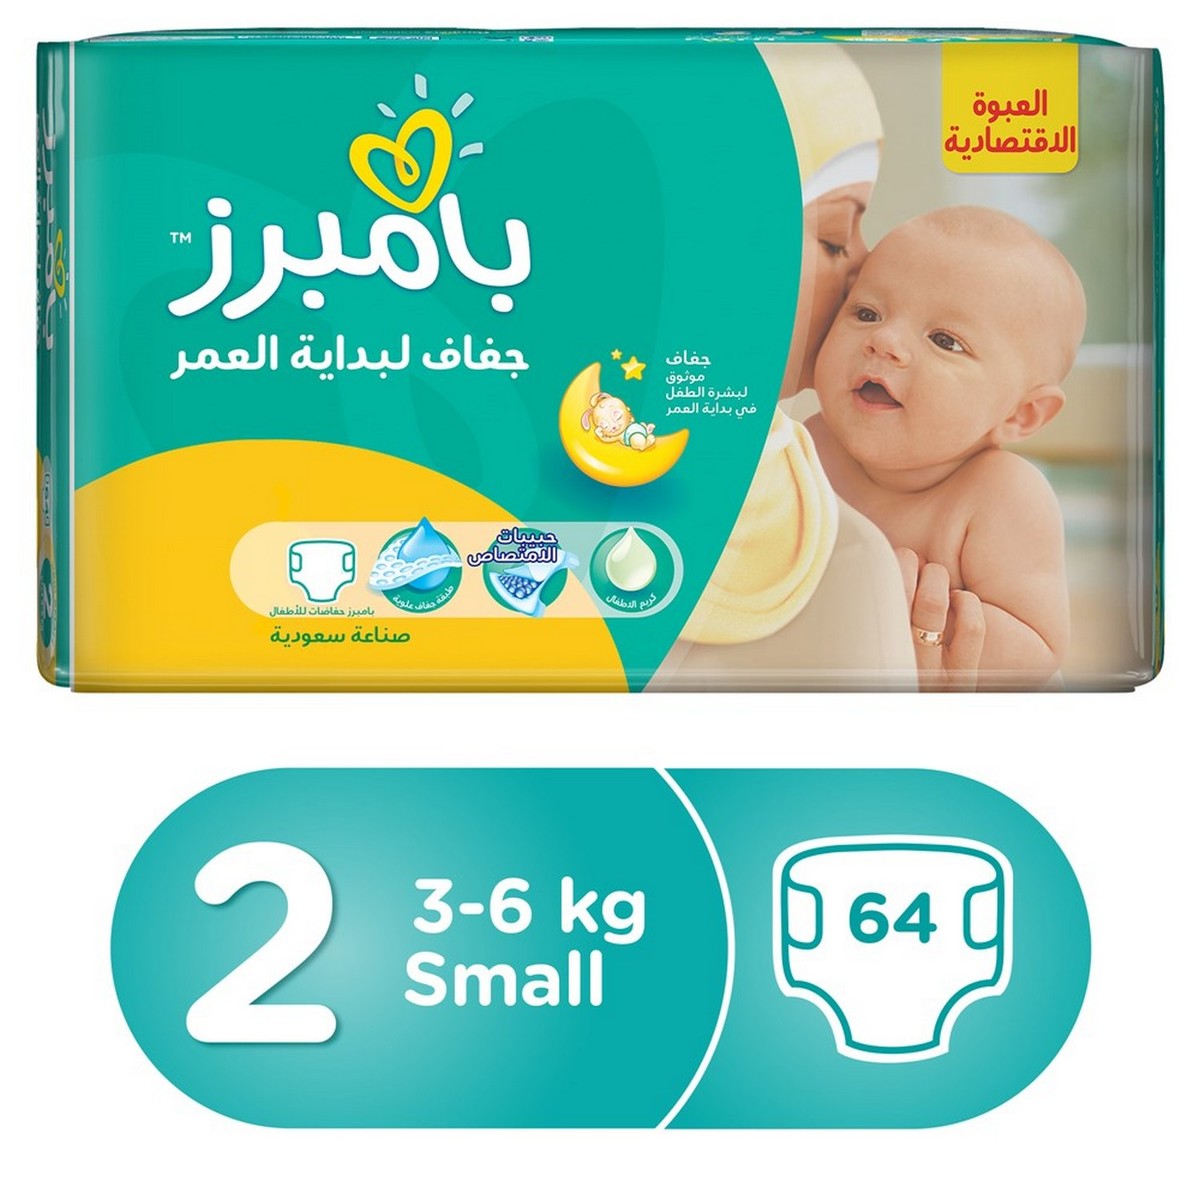 pampers new baby dry 2 cena